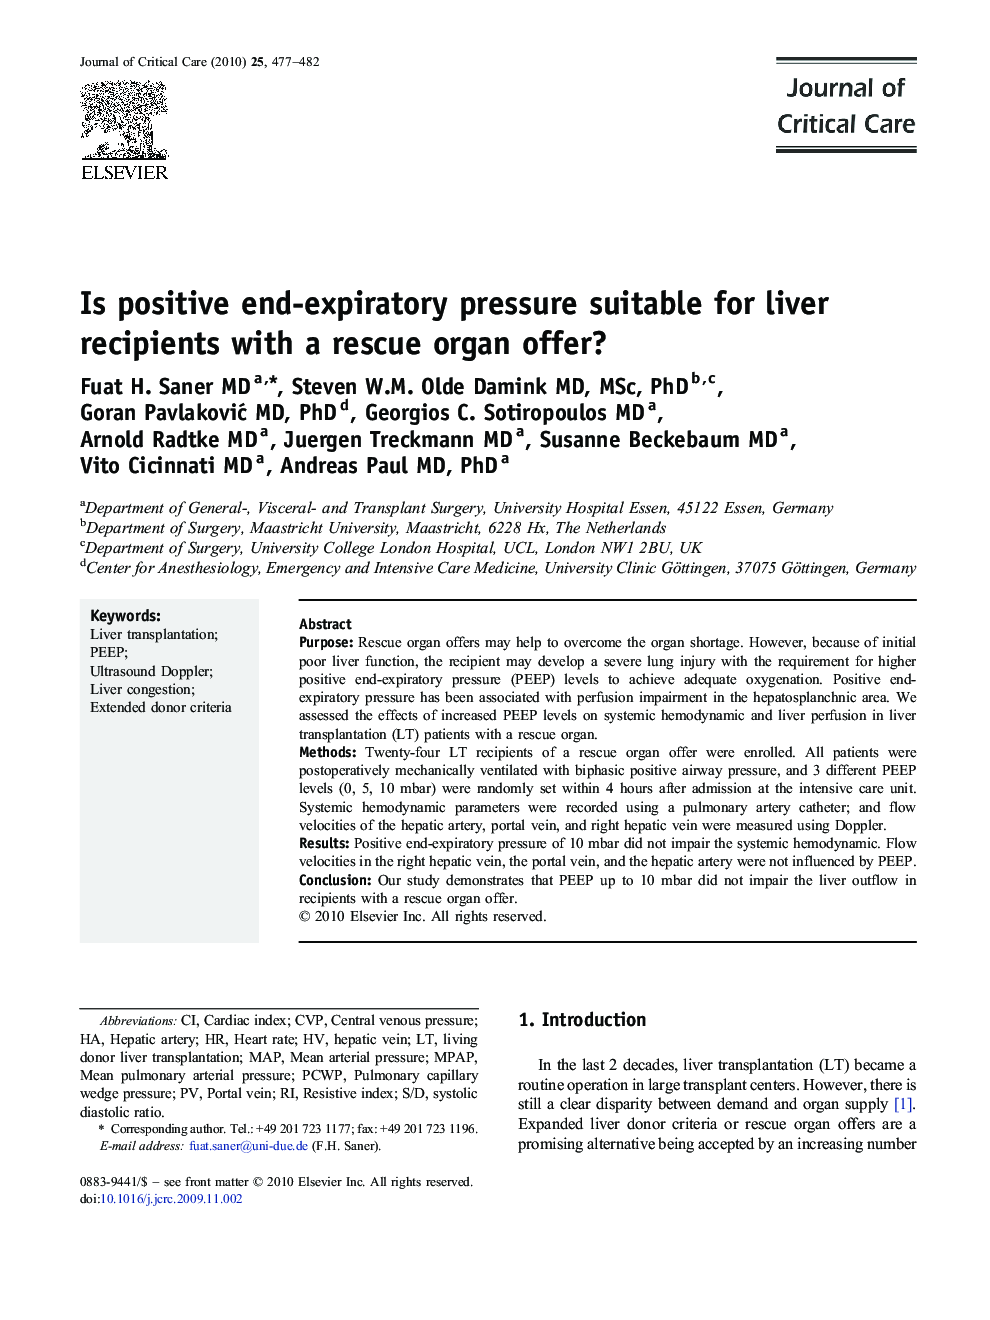 Is positive end-expiratory pressure suitable for liver recipients with a rescue organ offer?